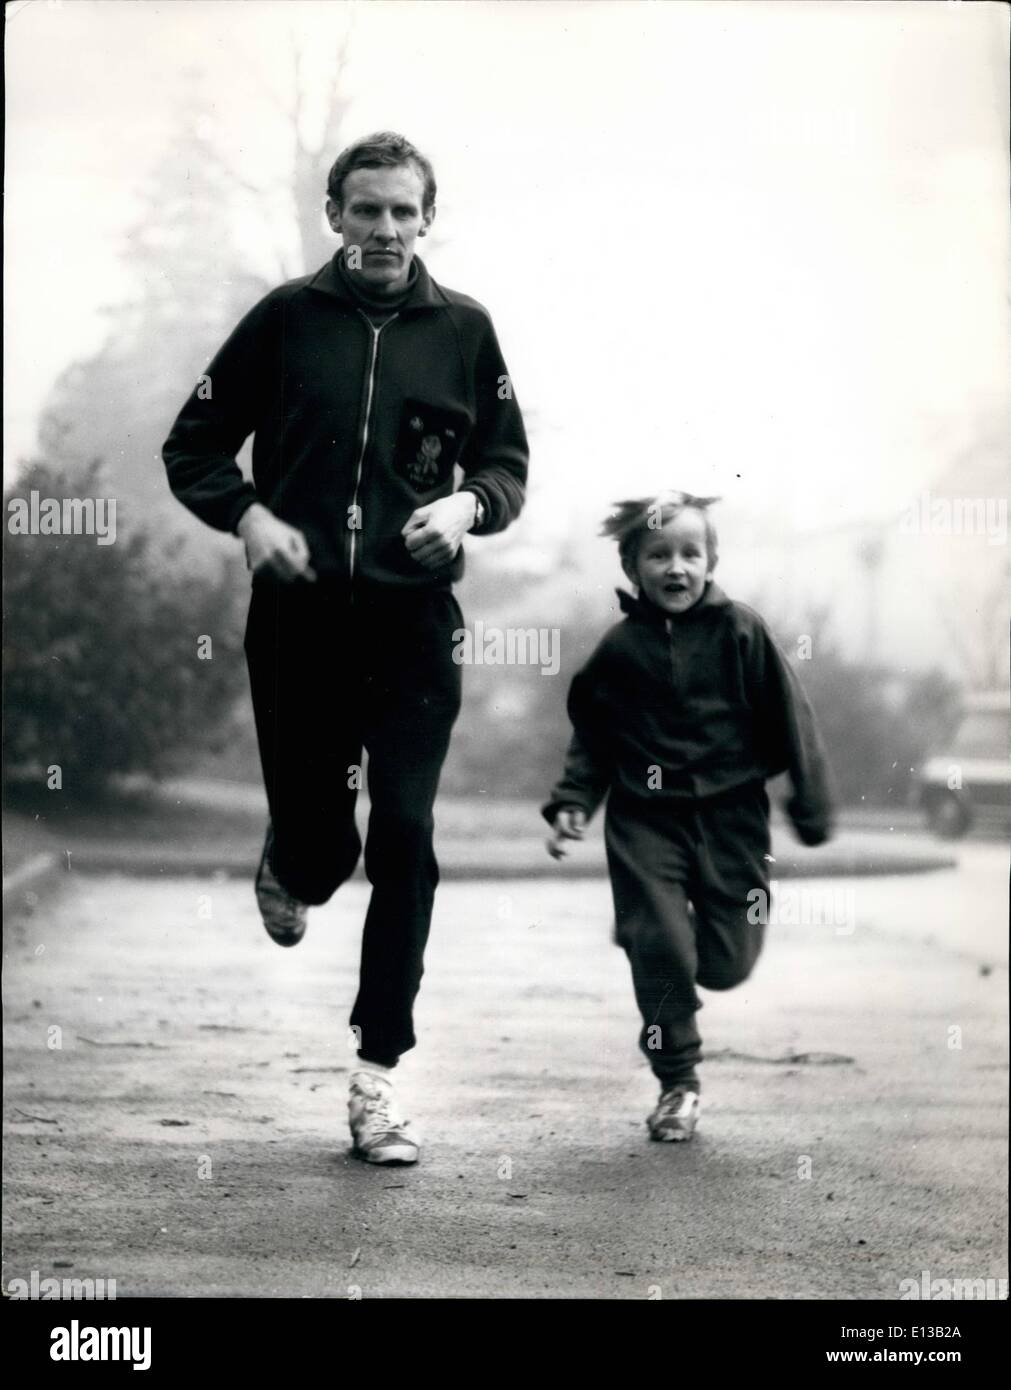 Feb. 29, 2012 - Training for his attempt on the 3,025 Trans America run world record, British athlete Bruce Tulloh, 32 - his six year old son Clive joins him in training. Stock Photo